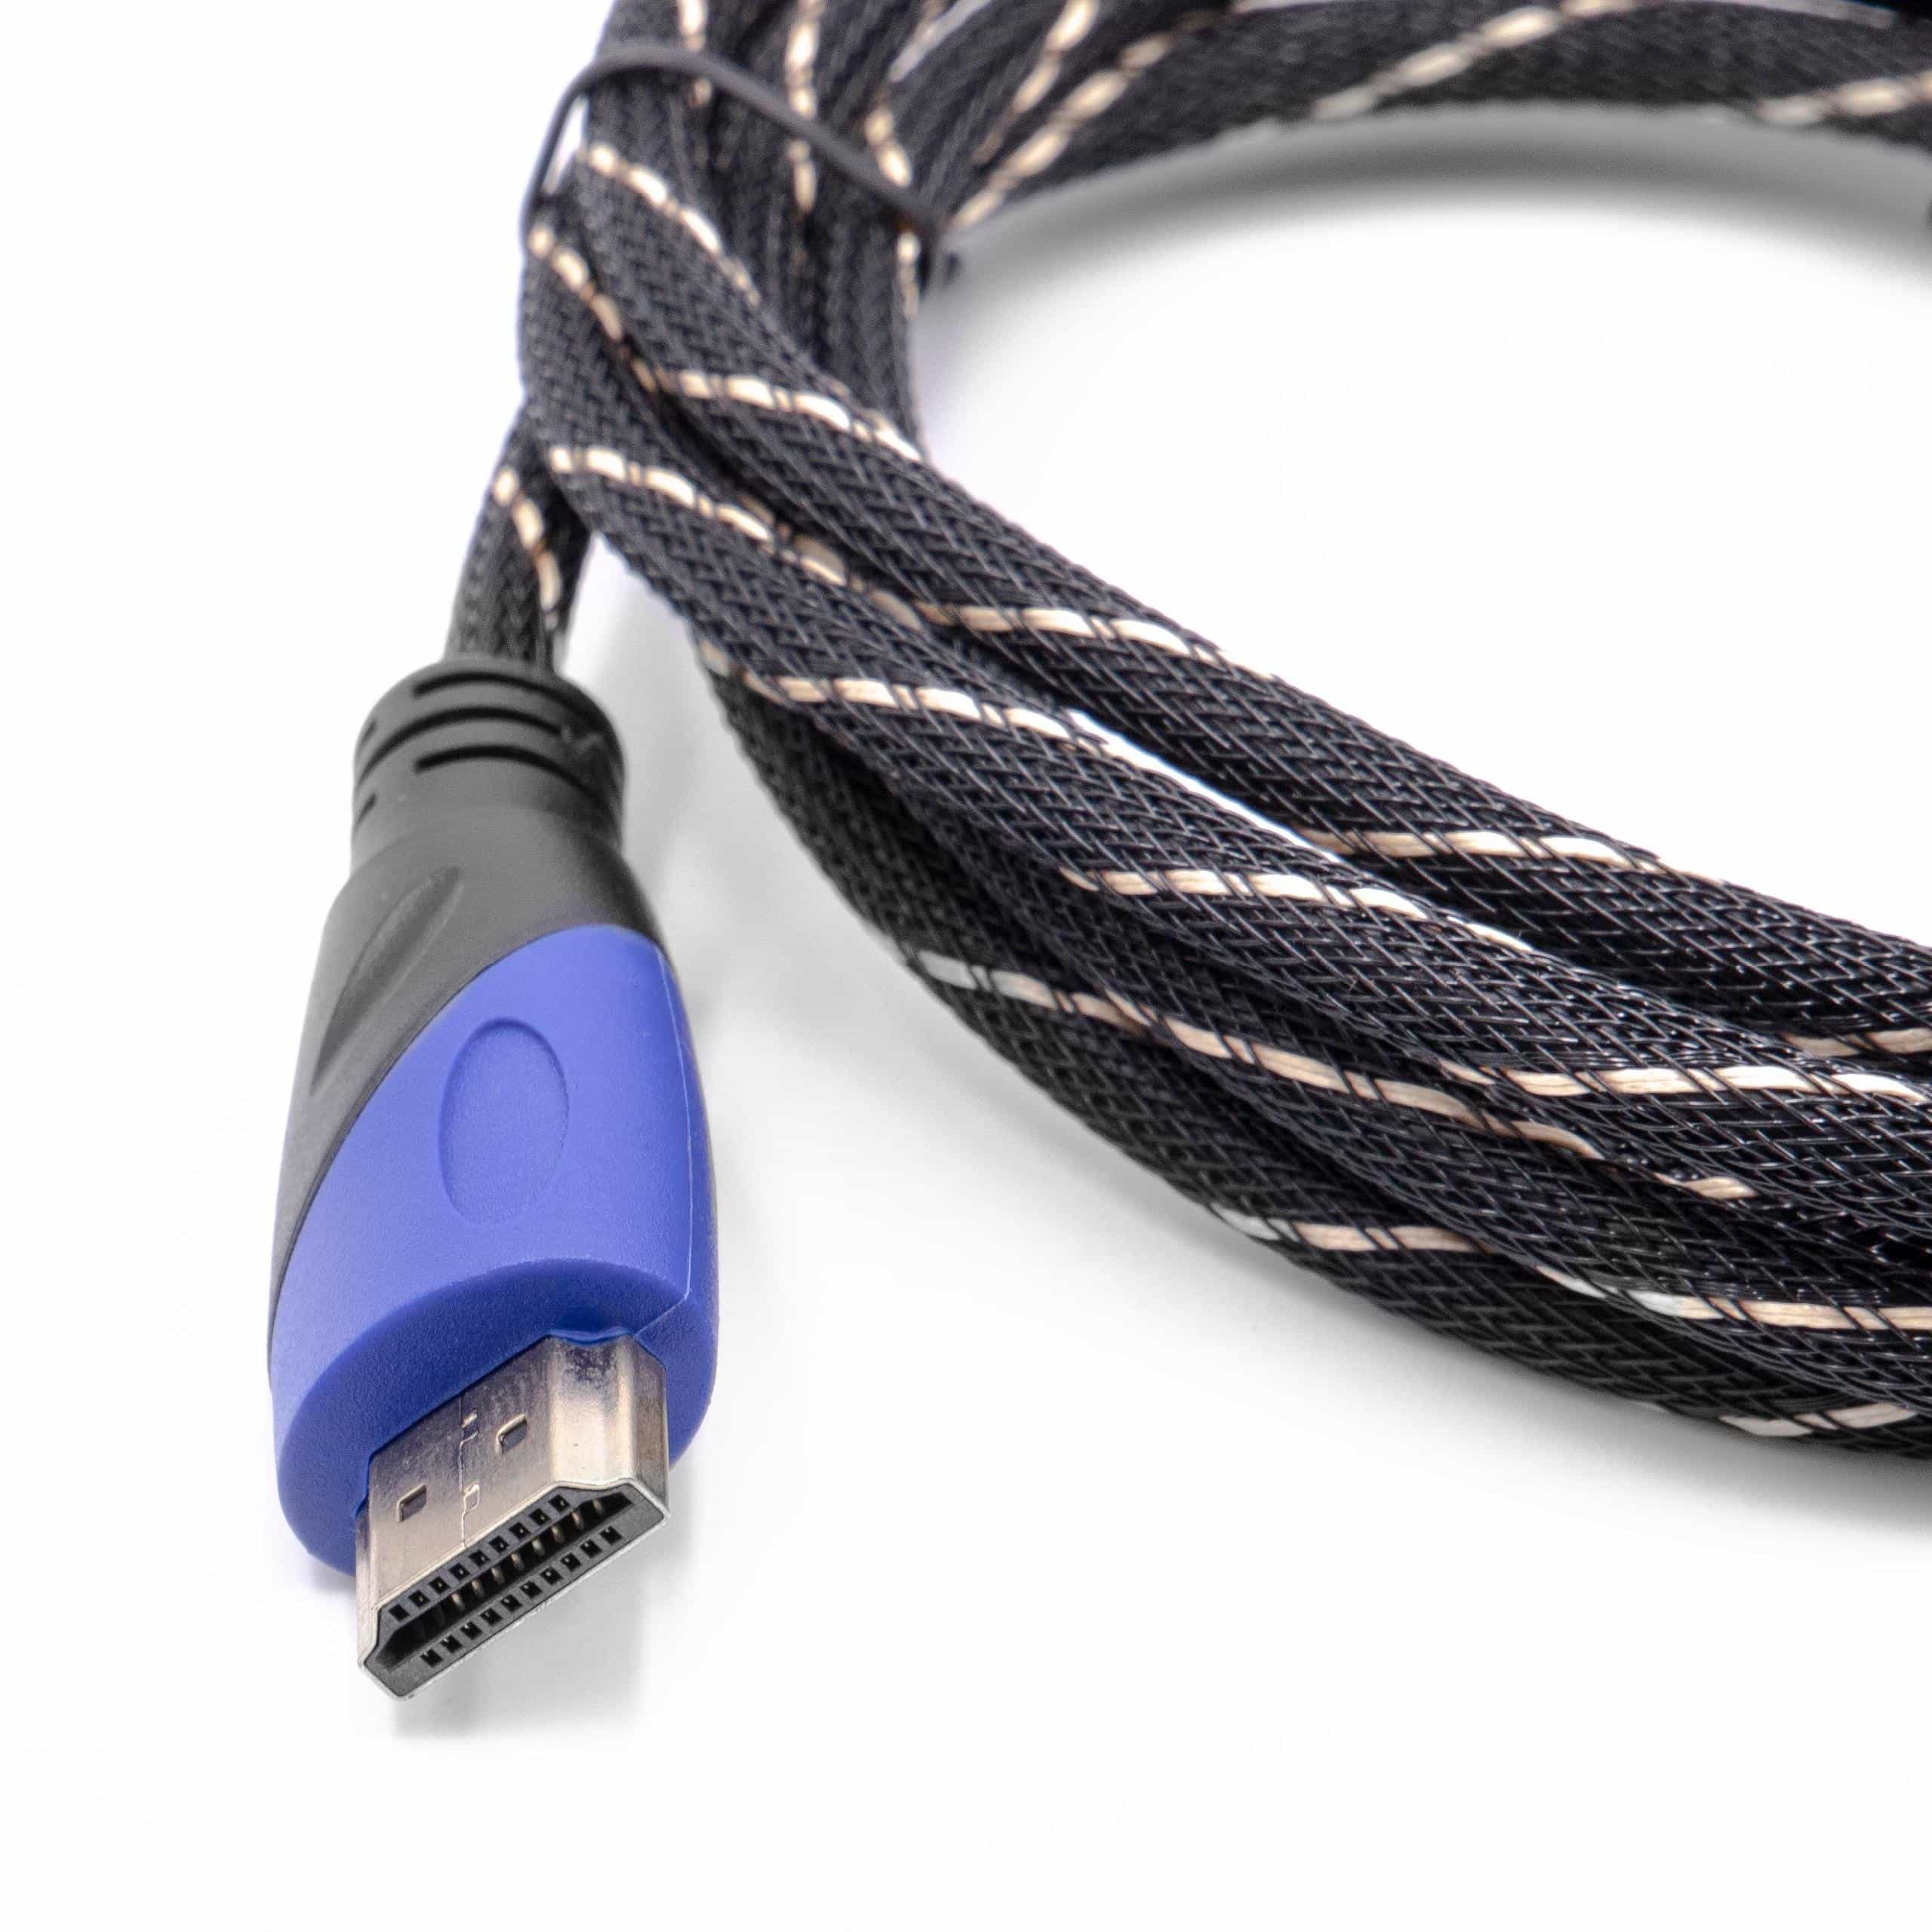 HDMI Cable V1.4 High Speed braided 1.8mfor Tablet, TV, Television, Playstation, Computer, Monitor, DVD Player 